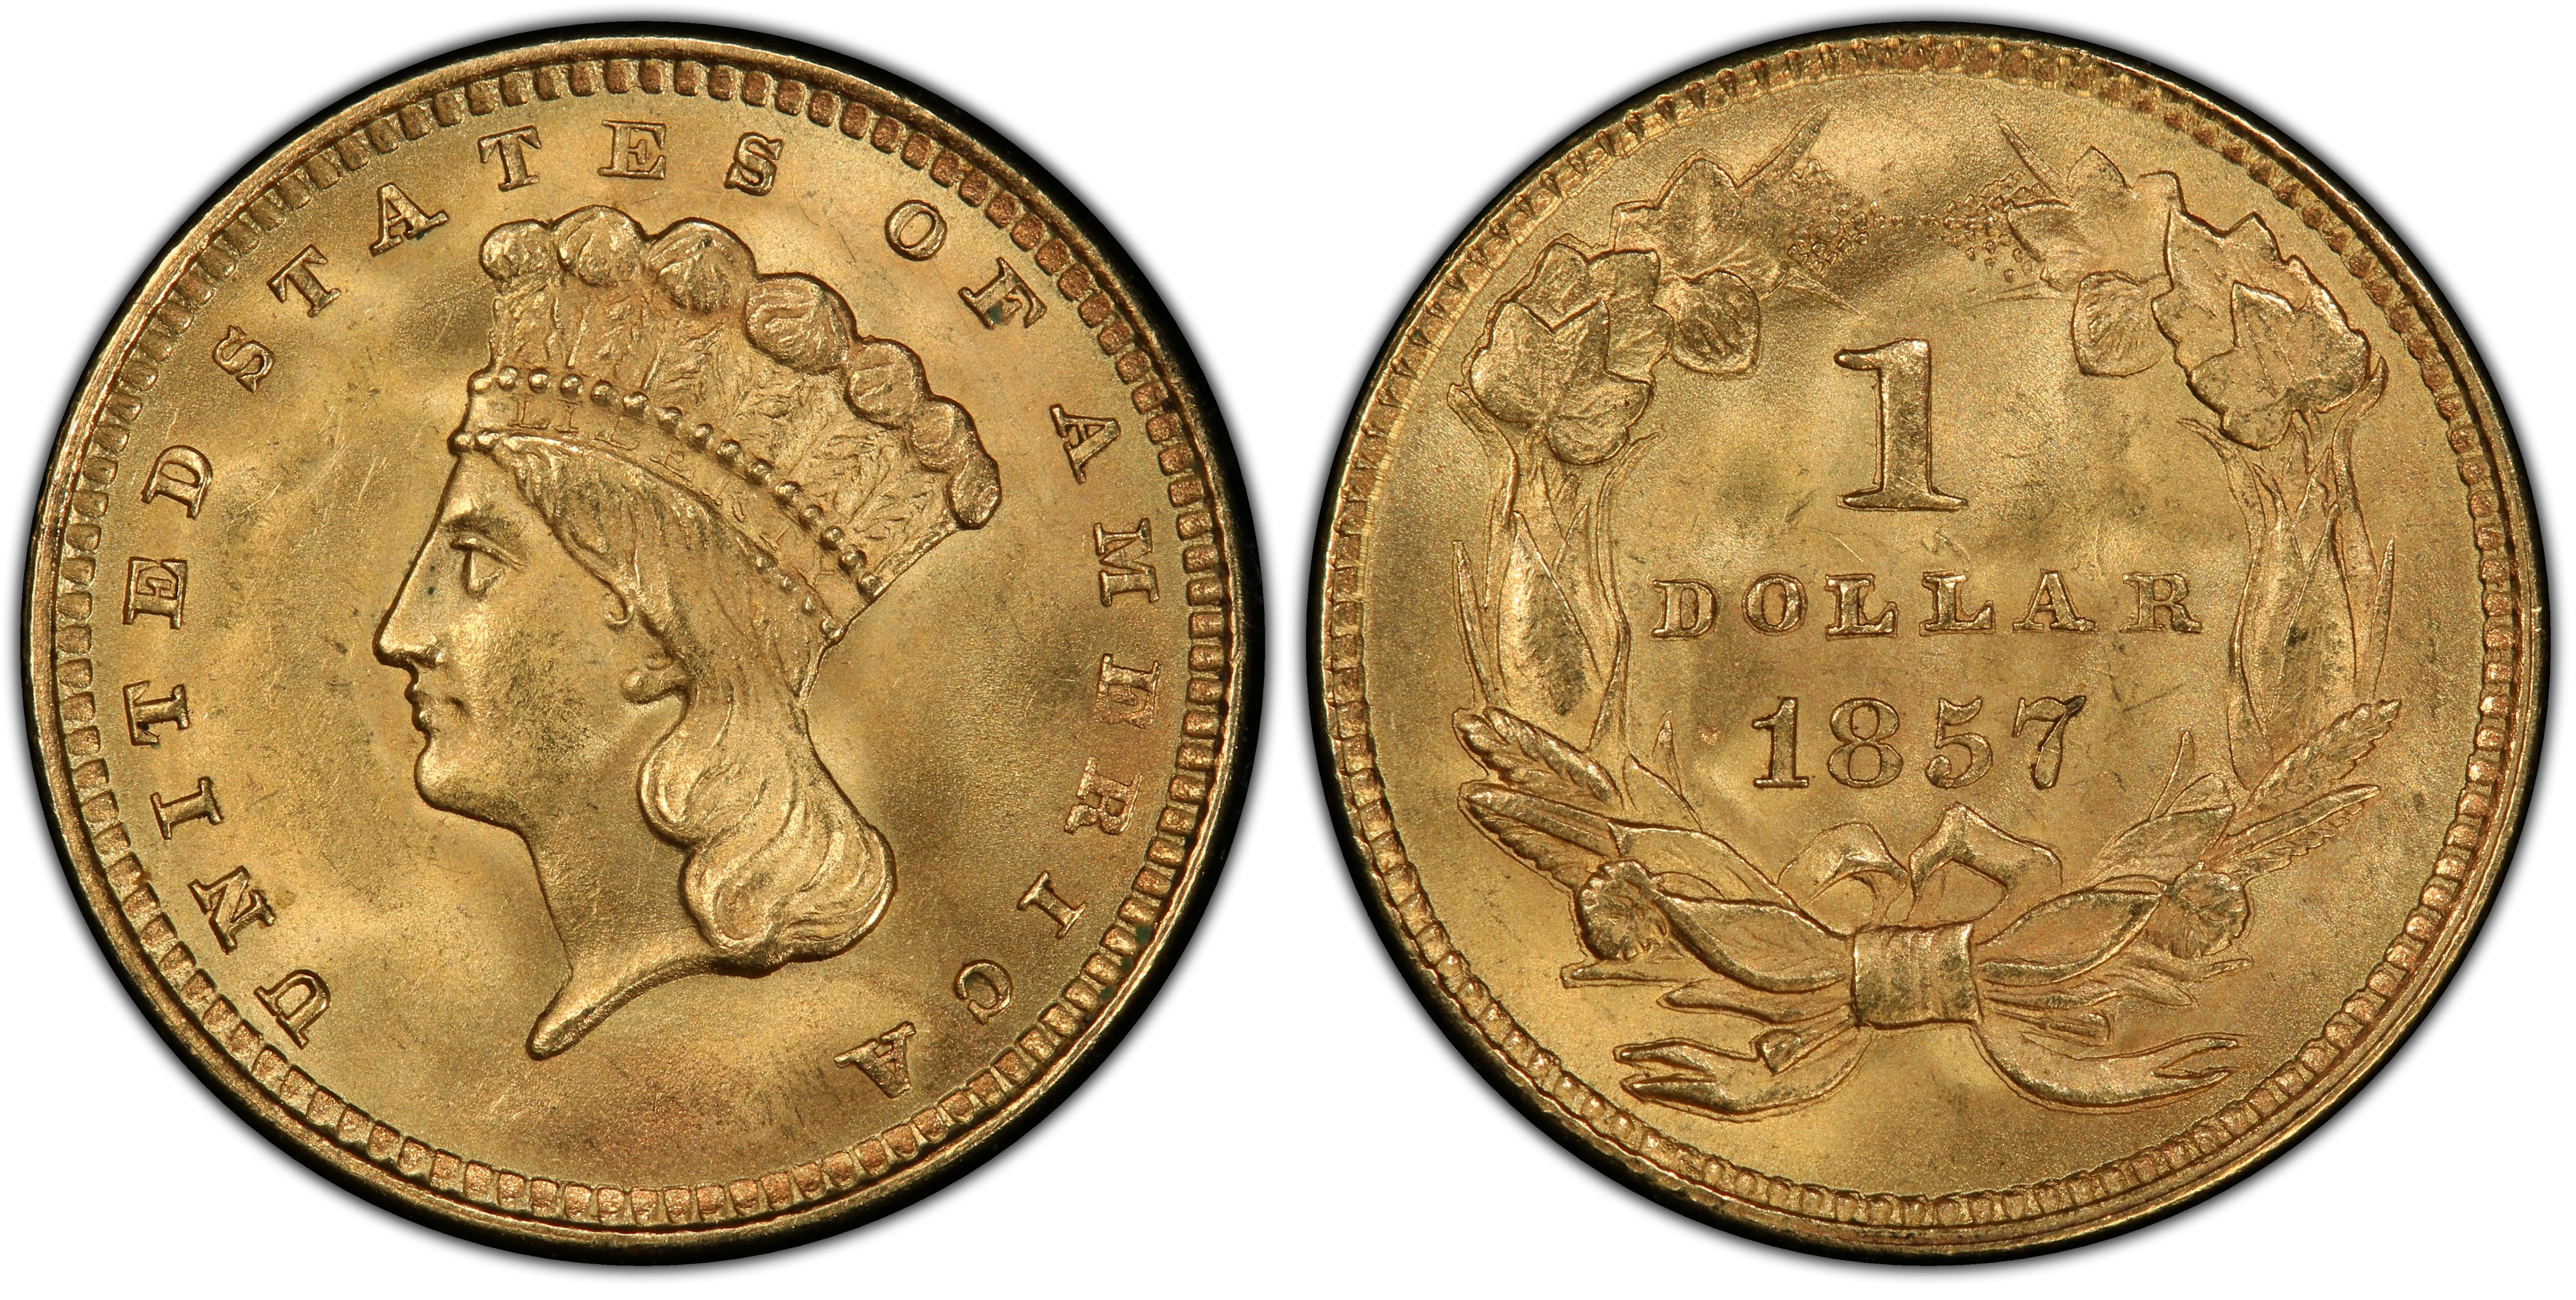 Images of Gold Dollar 1857 G$1 - PCGS CoinFacts